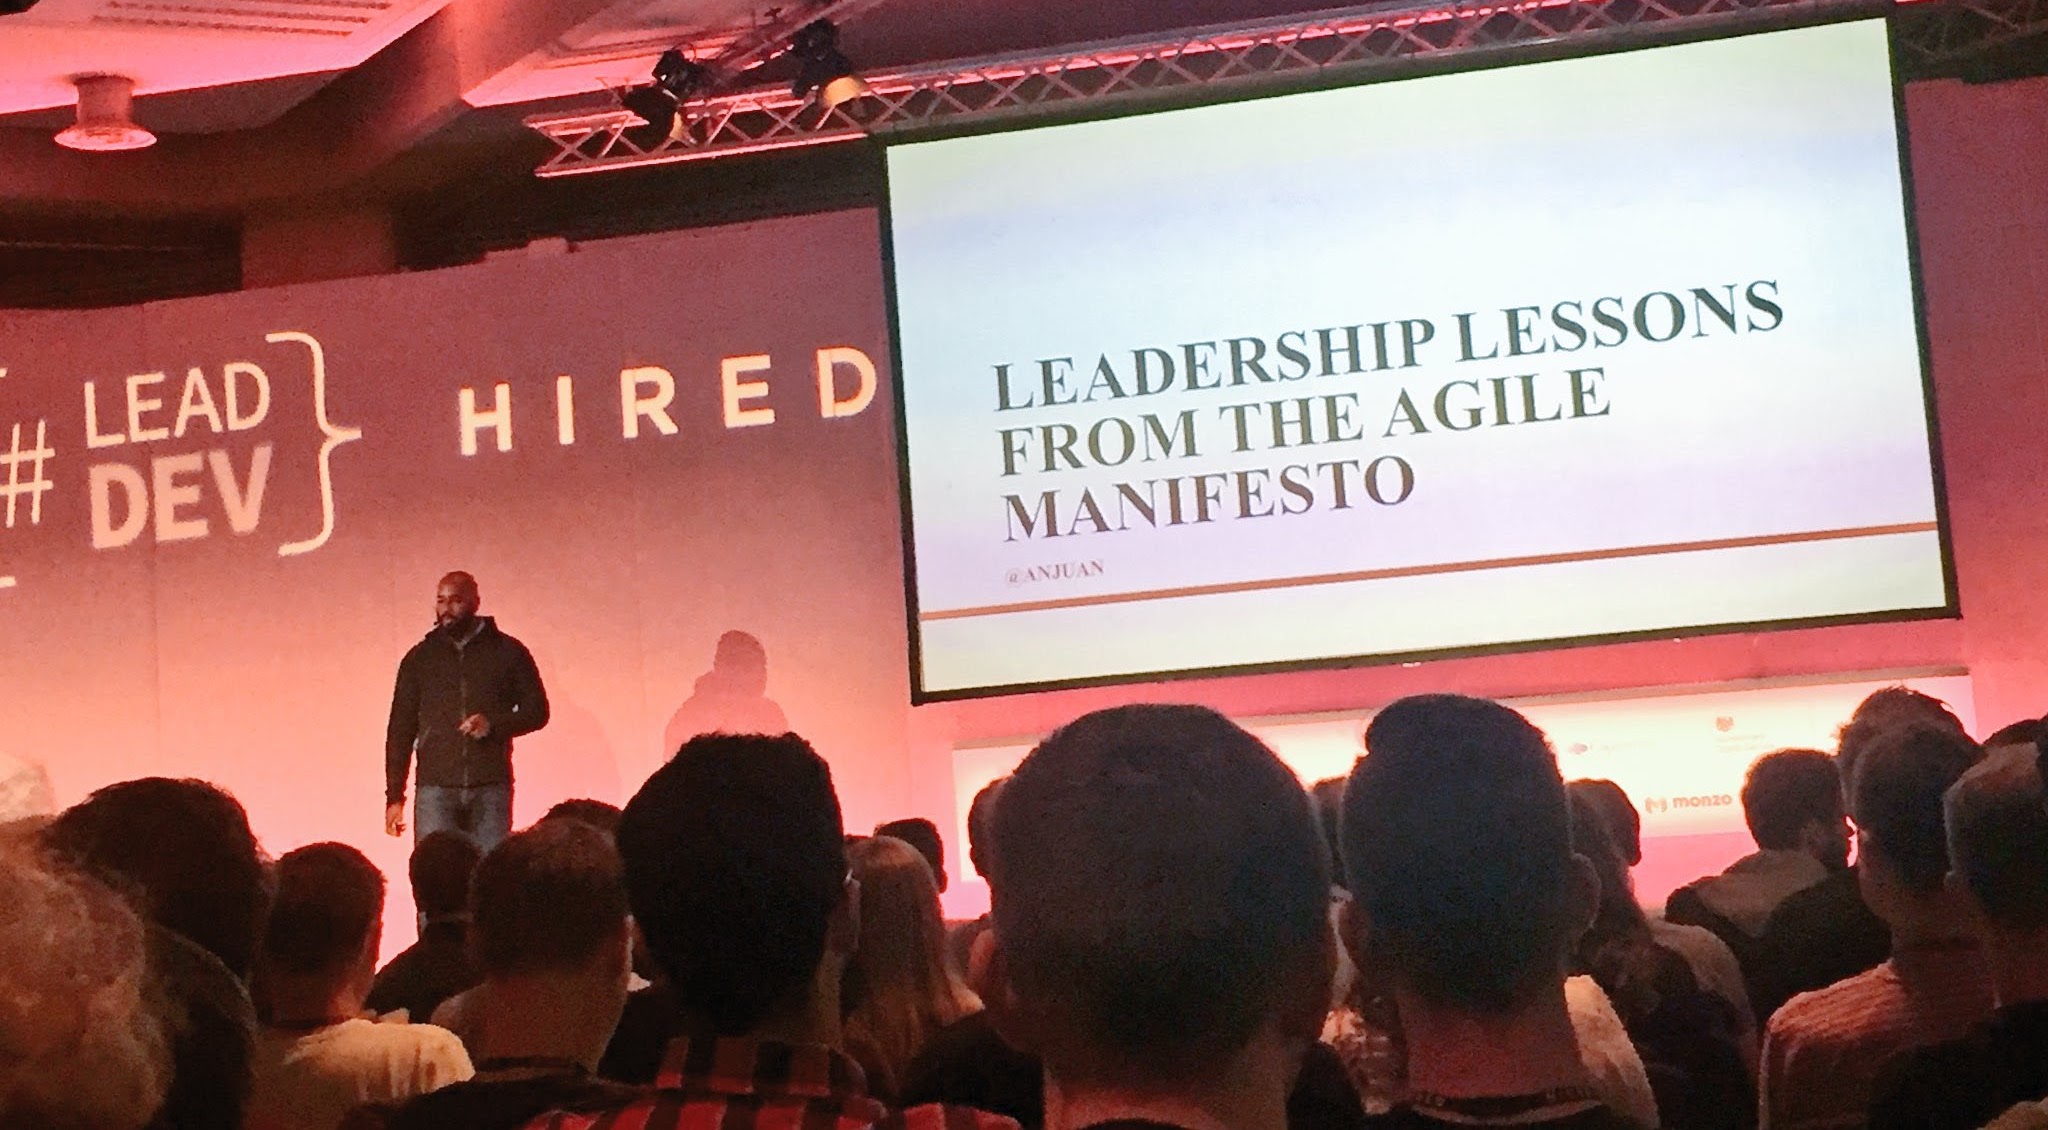 Giving my Leadership Lessons from the Agile Manifesto talk at The Lead Developer UK in London.